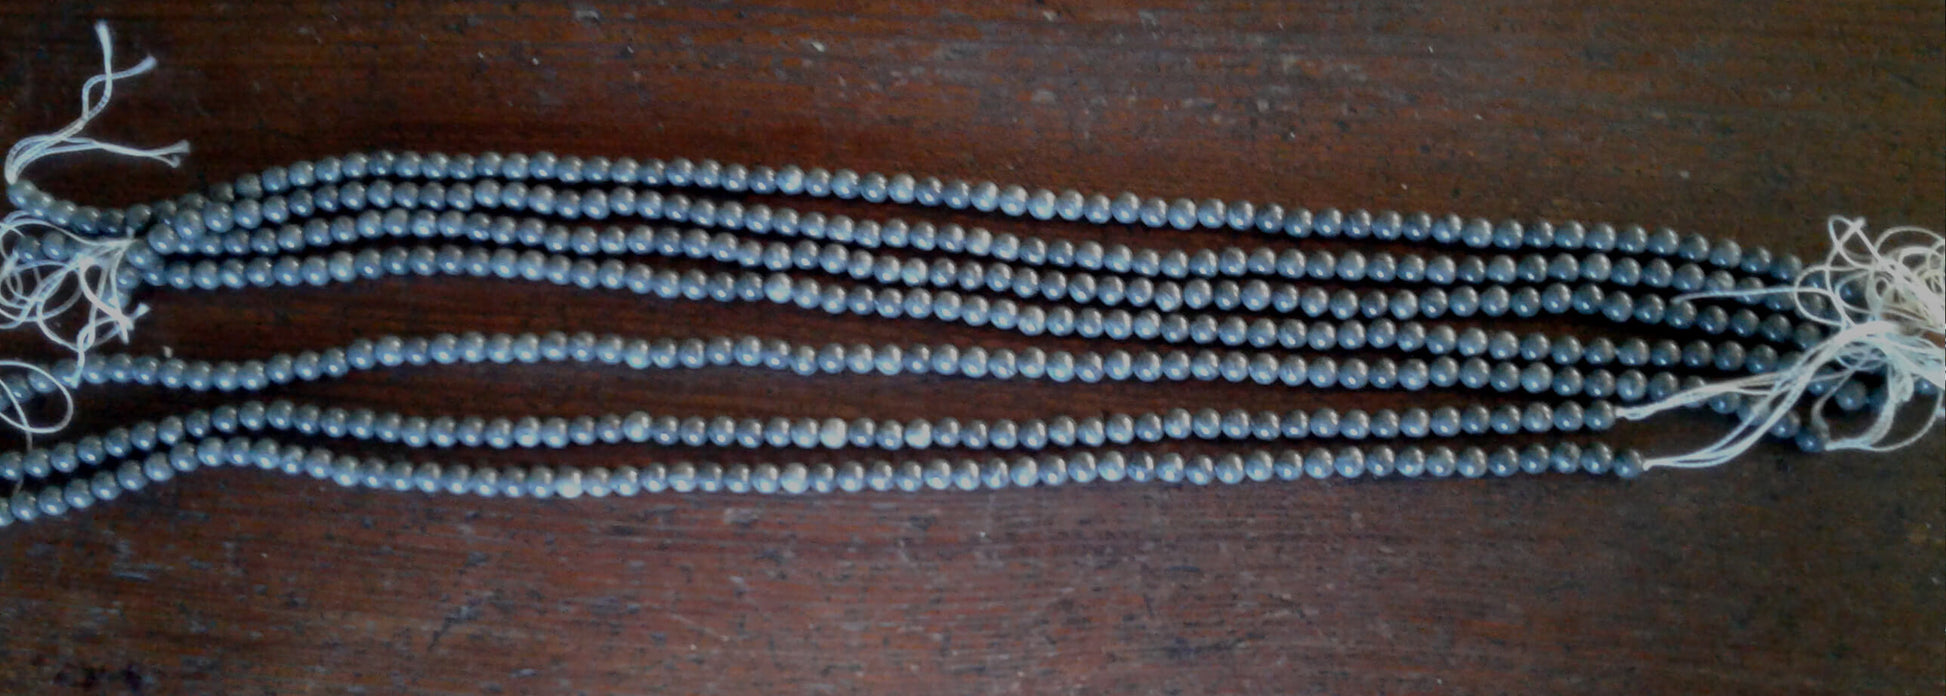 Exceptional Clear Creek CA jadeite beads in Gunmetal Gray. Round beads with approx. 6mm diameter. Strands are 16" in length. Artisan quality. Sourced from Clear Creek, in the San Panoche Mountains of San Benito County, CA